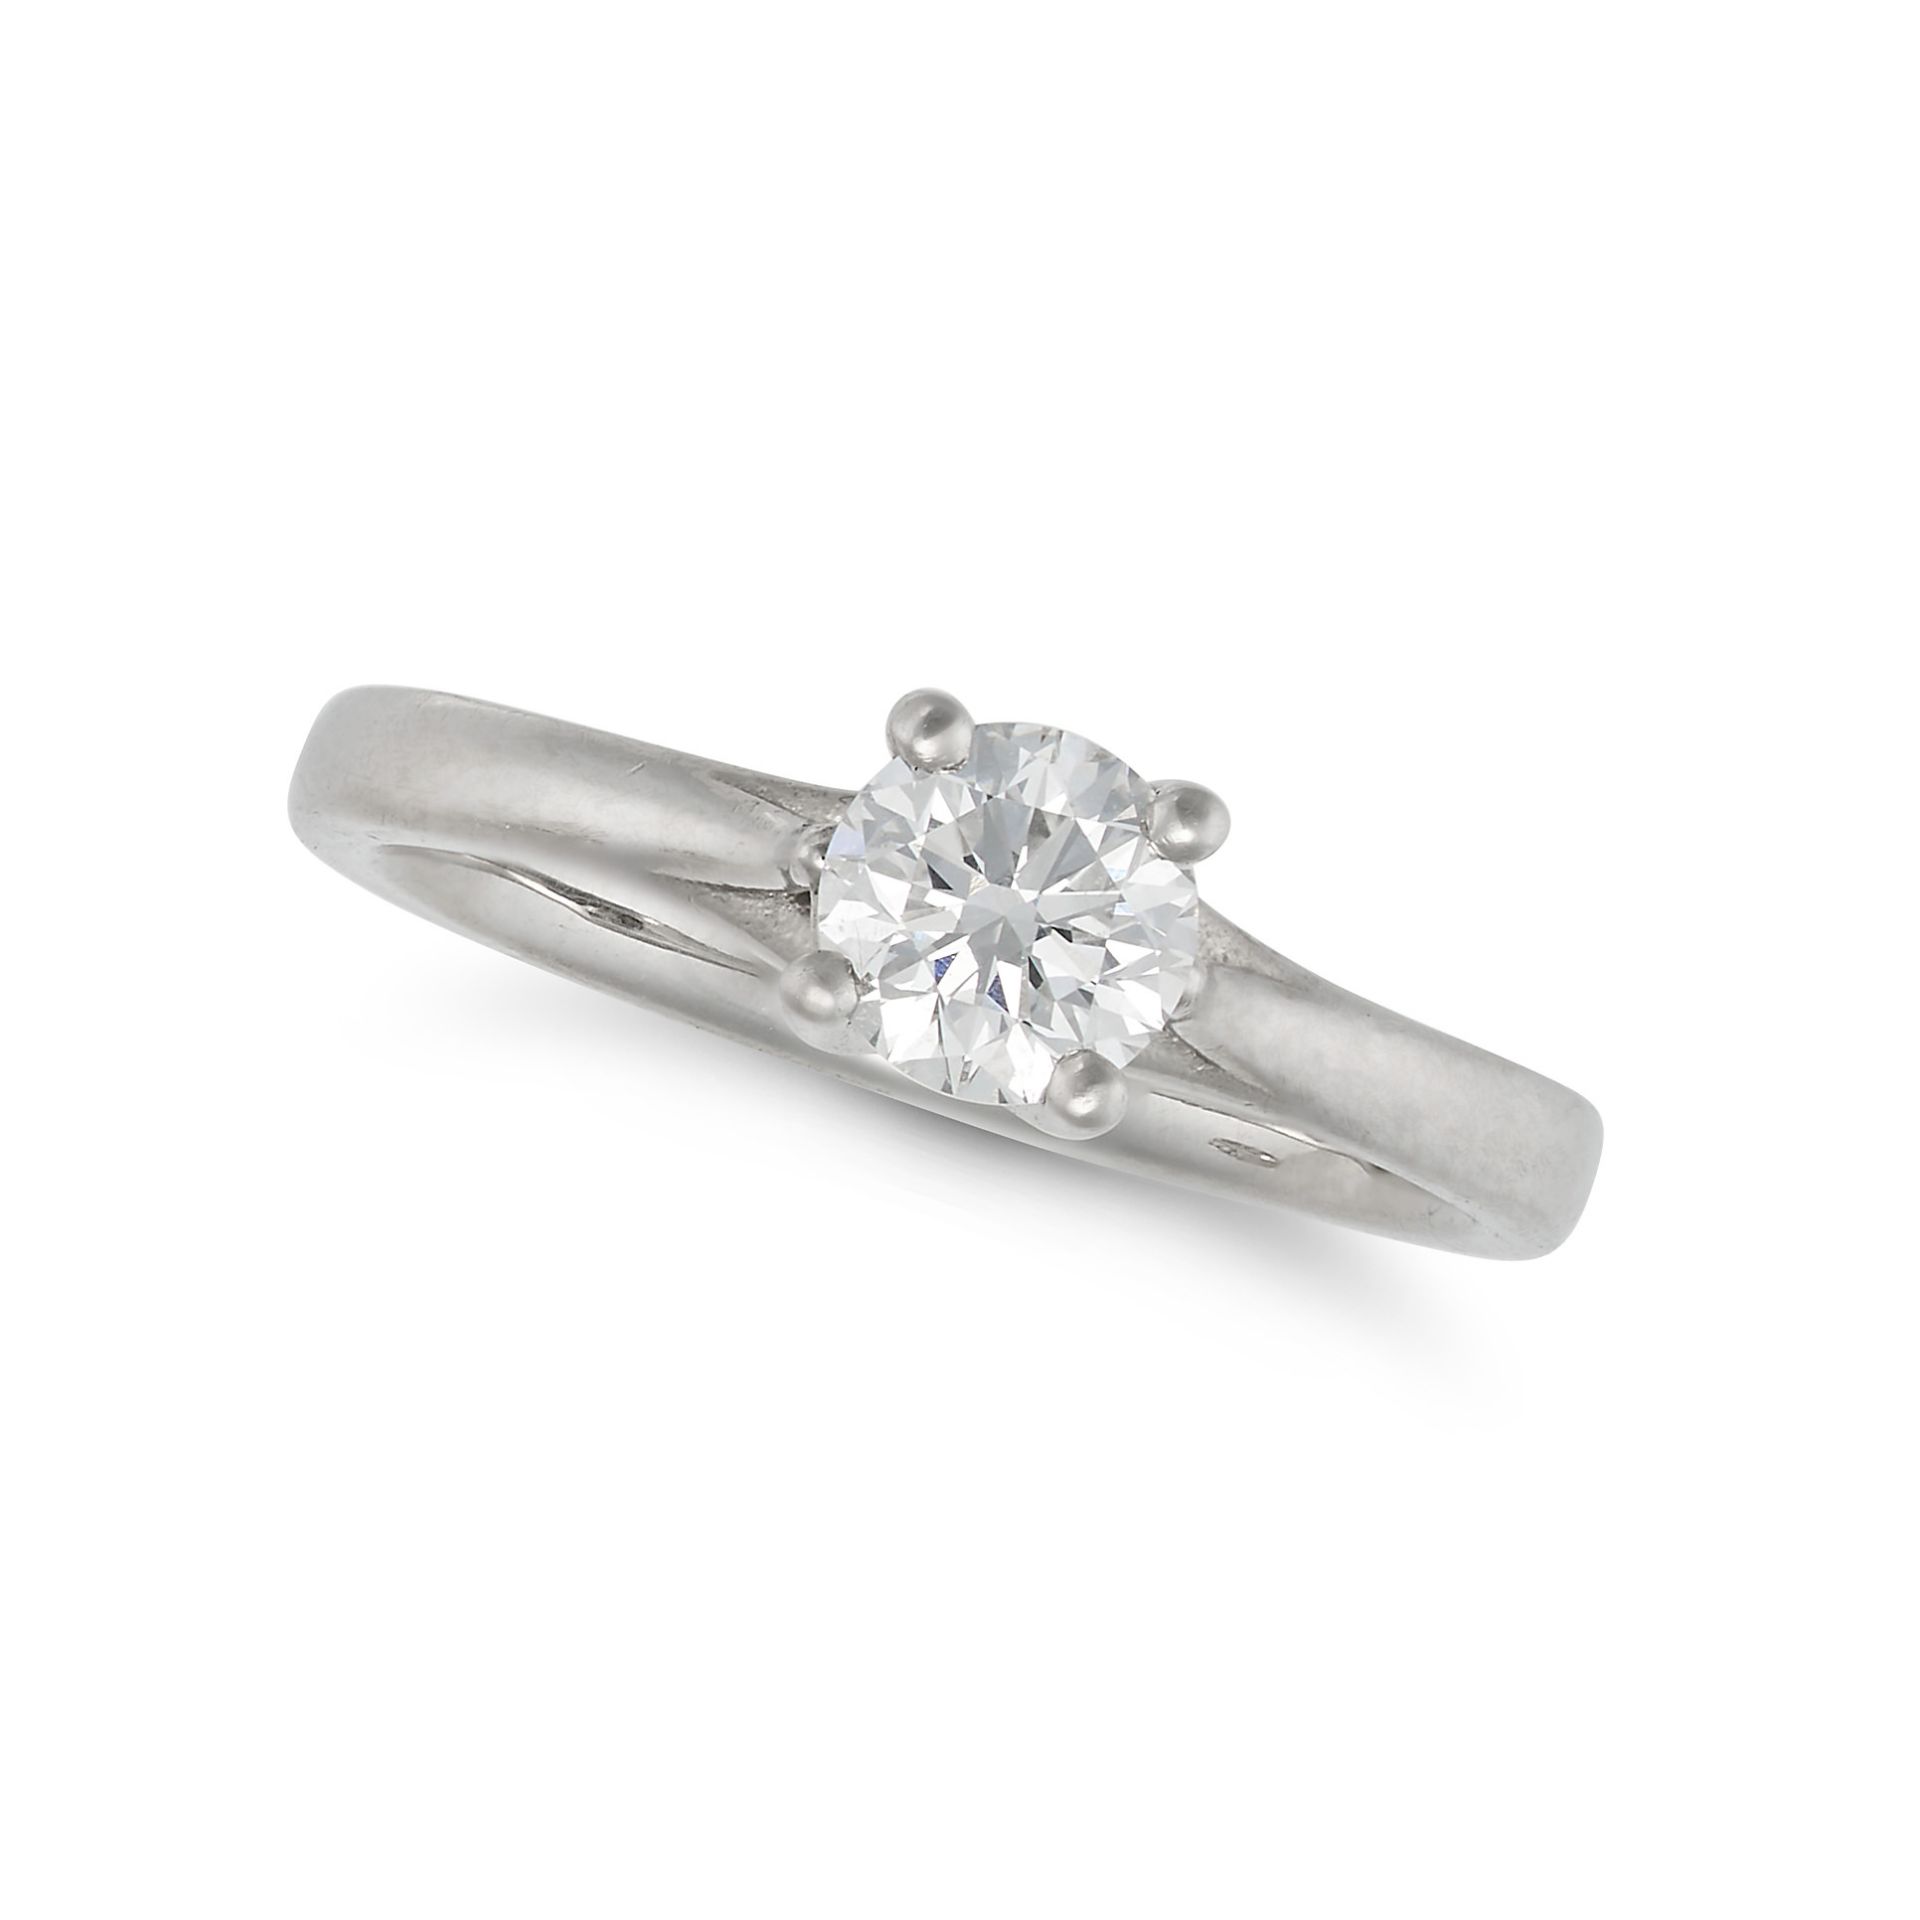 A SOLITAIRE DIAMOND RING in platinum, set with a round brilliant cut diamond of 0.50 carats, make...